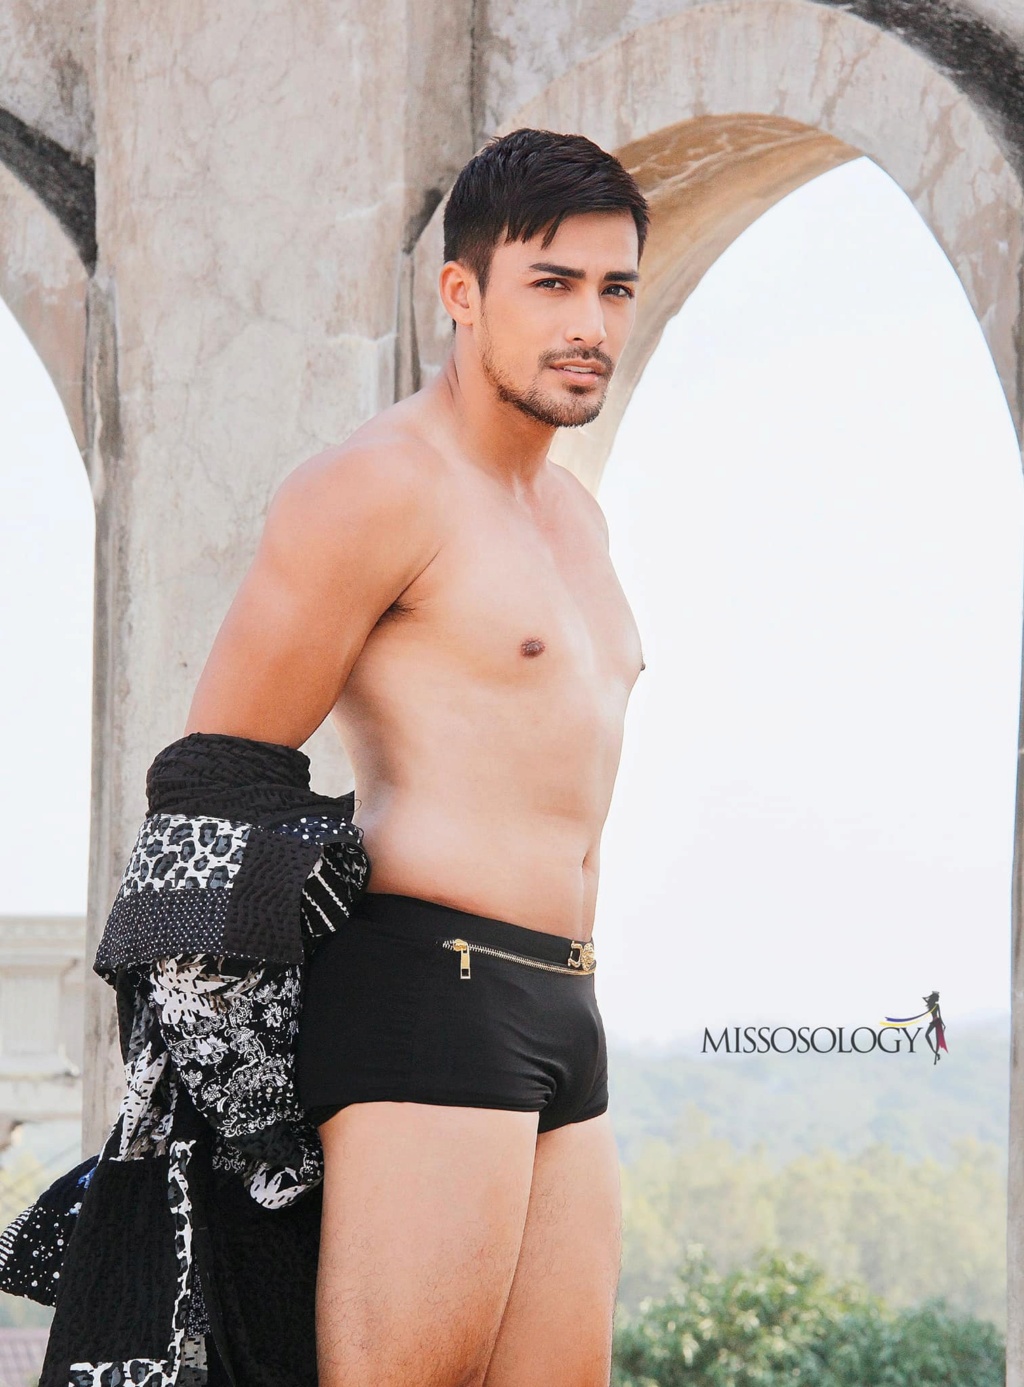 Official Thread of Mister International 2014 - Neil Perez (PHILIPPINES) - Page 4 28010411